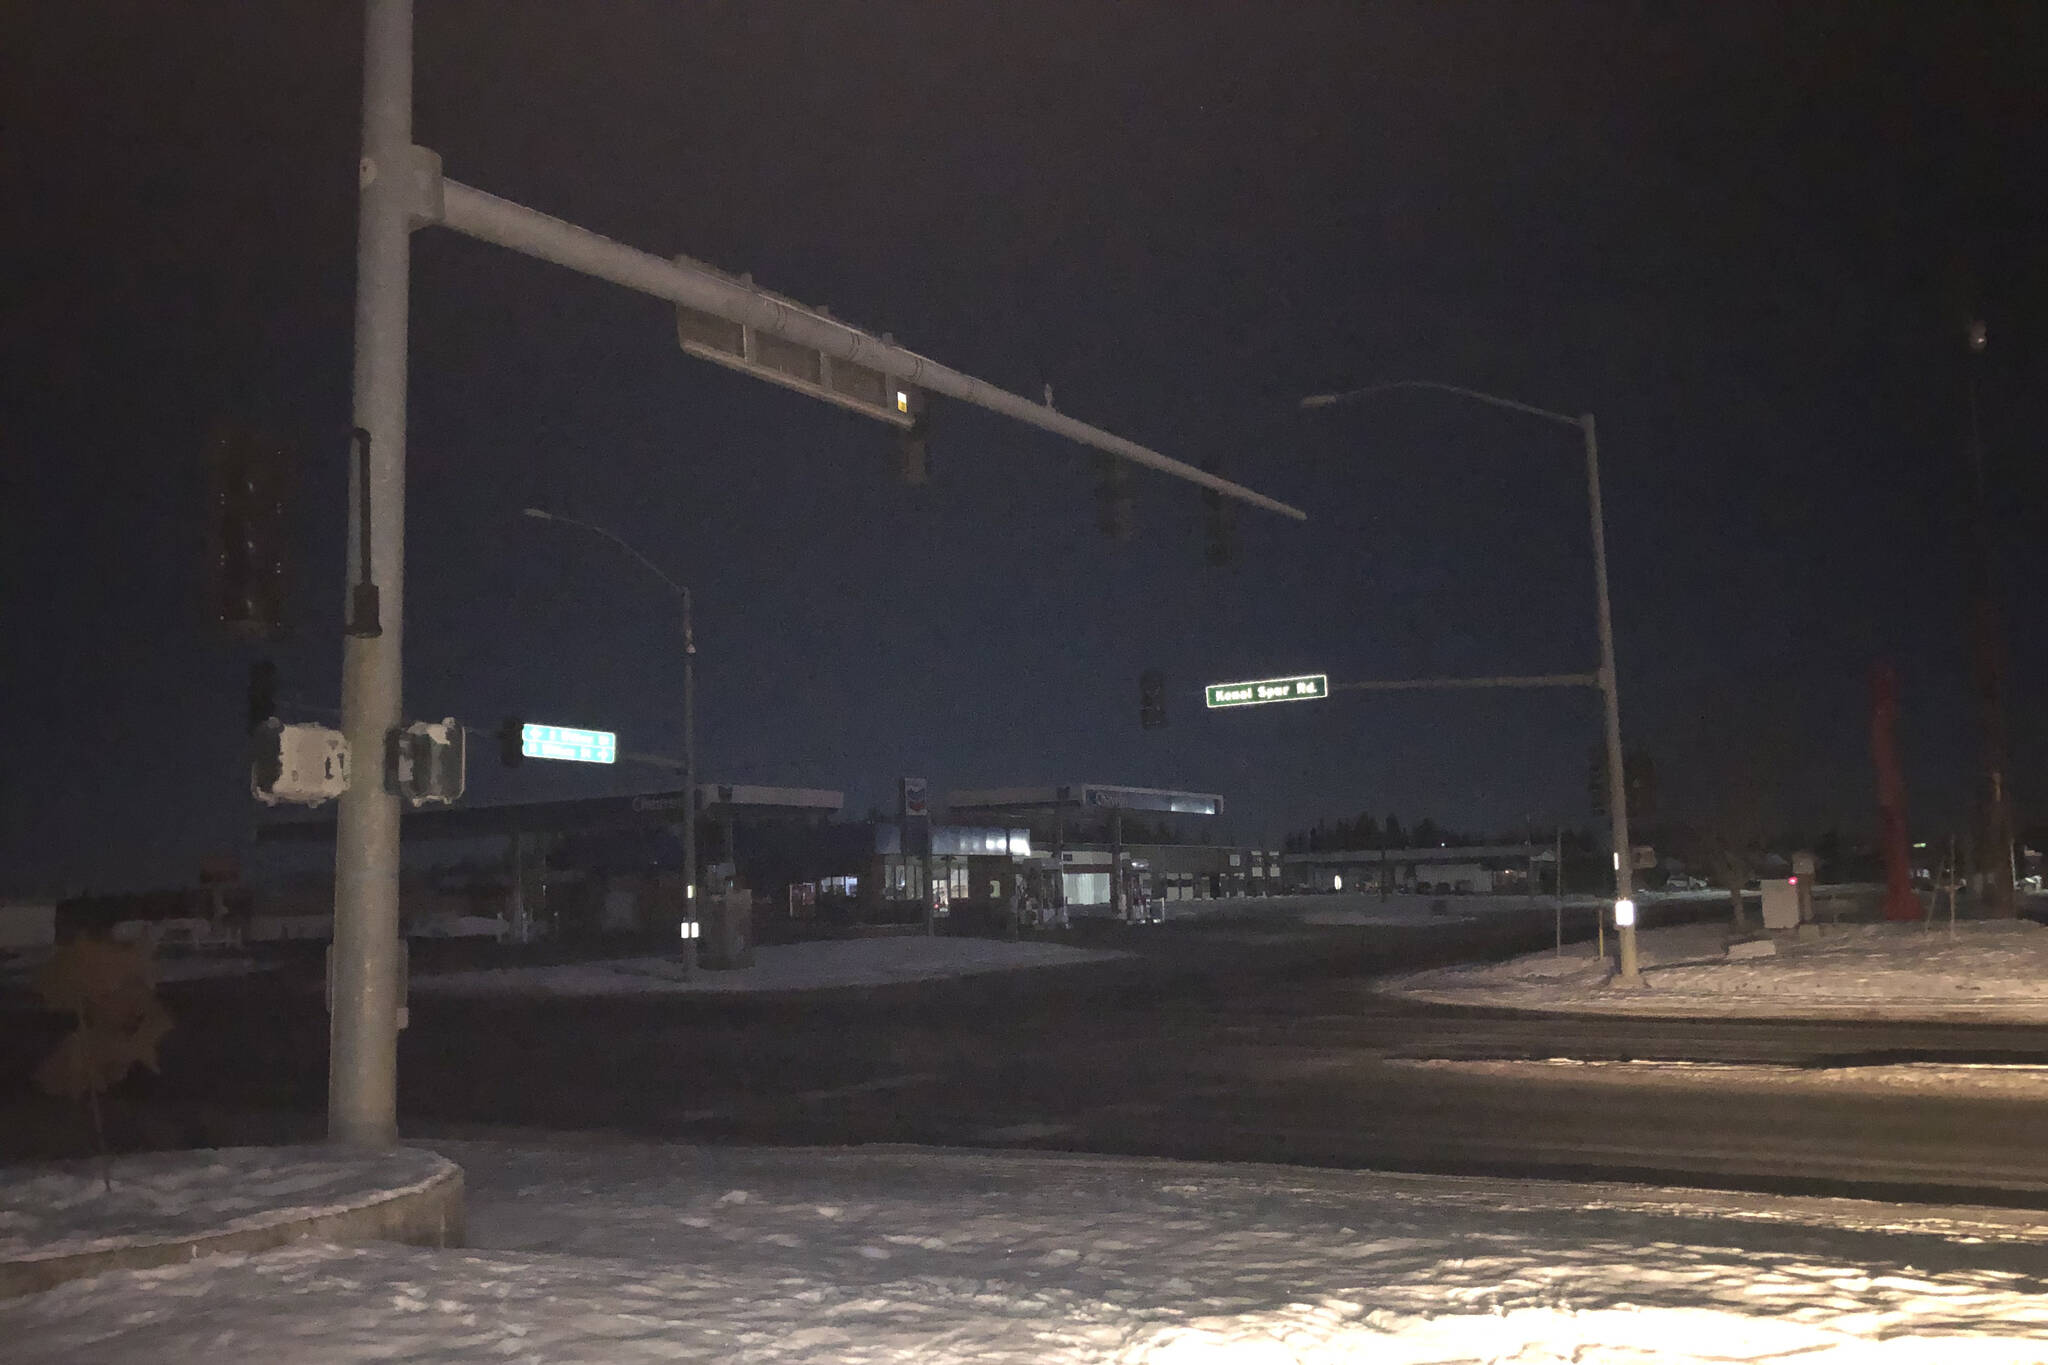 The intersection of Willow Street and the Kenai Spur Highway shows the stoplights were out Wednesday night as approximately 2,700 people experienced a Homer Electric Association power outage. (Camille Botello/Peninsula Clarion)